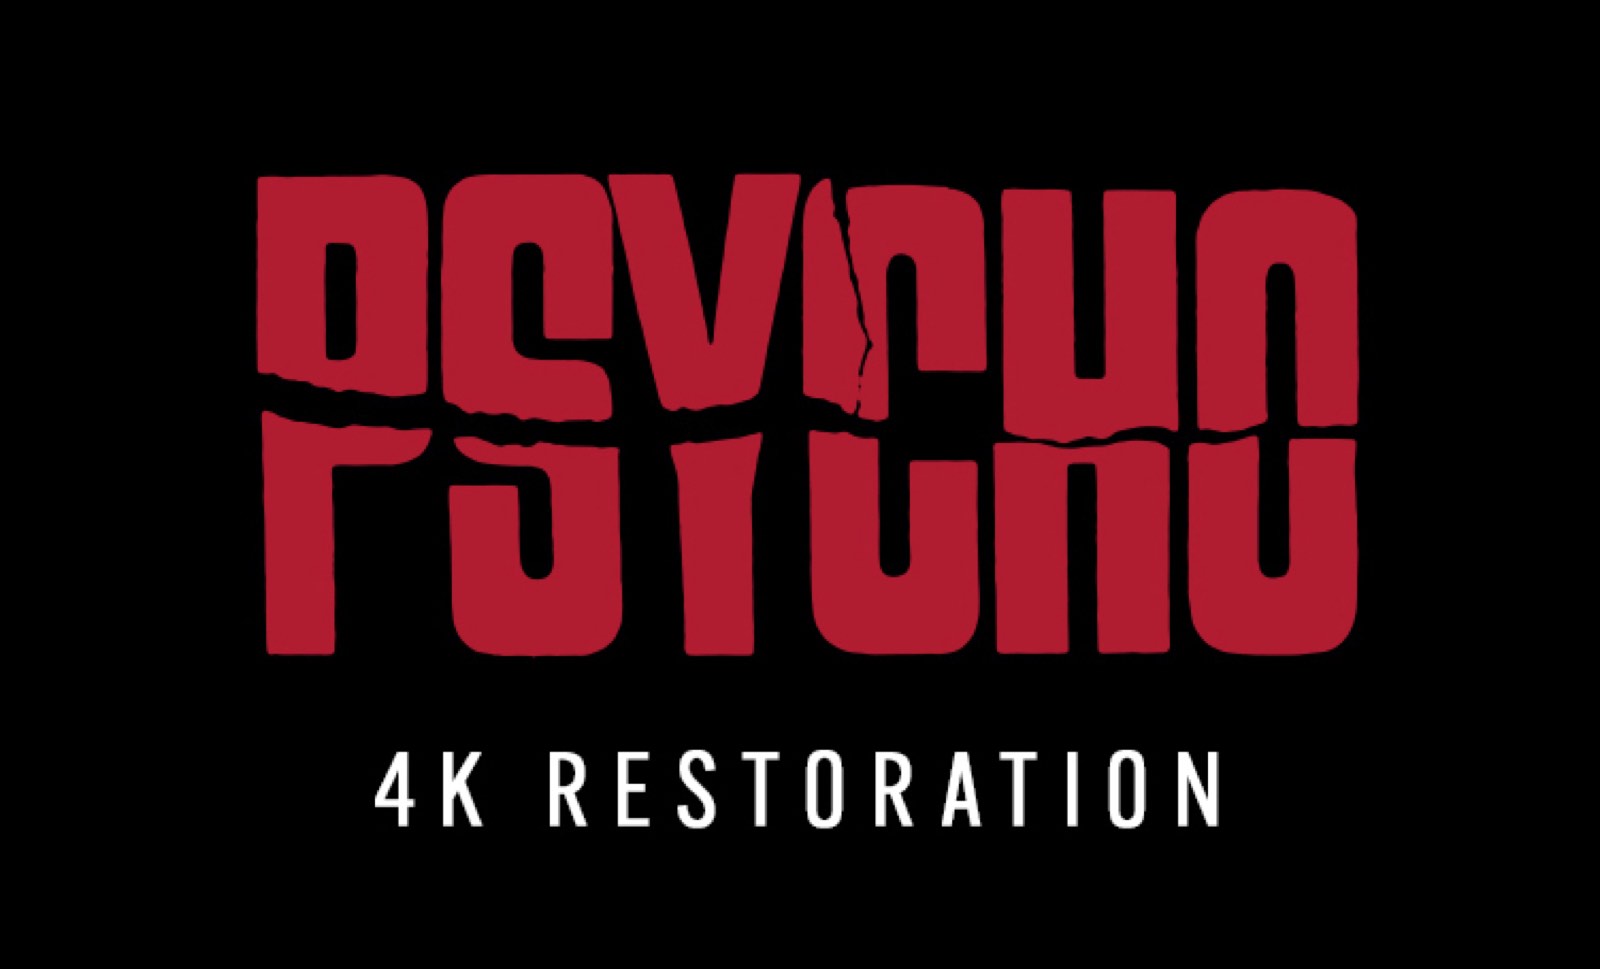 Psycho Uncut slashes its way back to cinemas in 4K